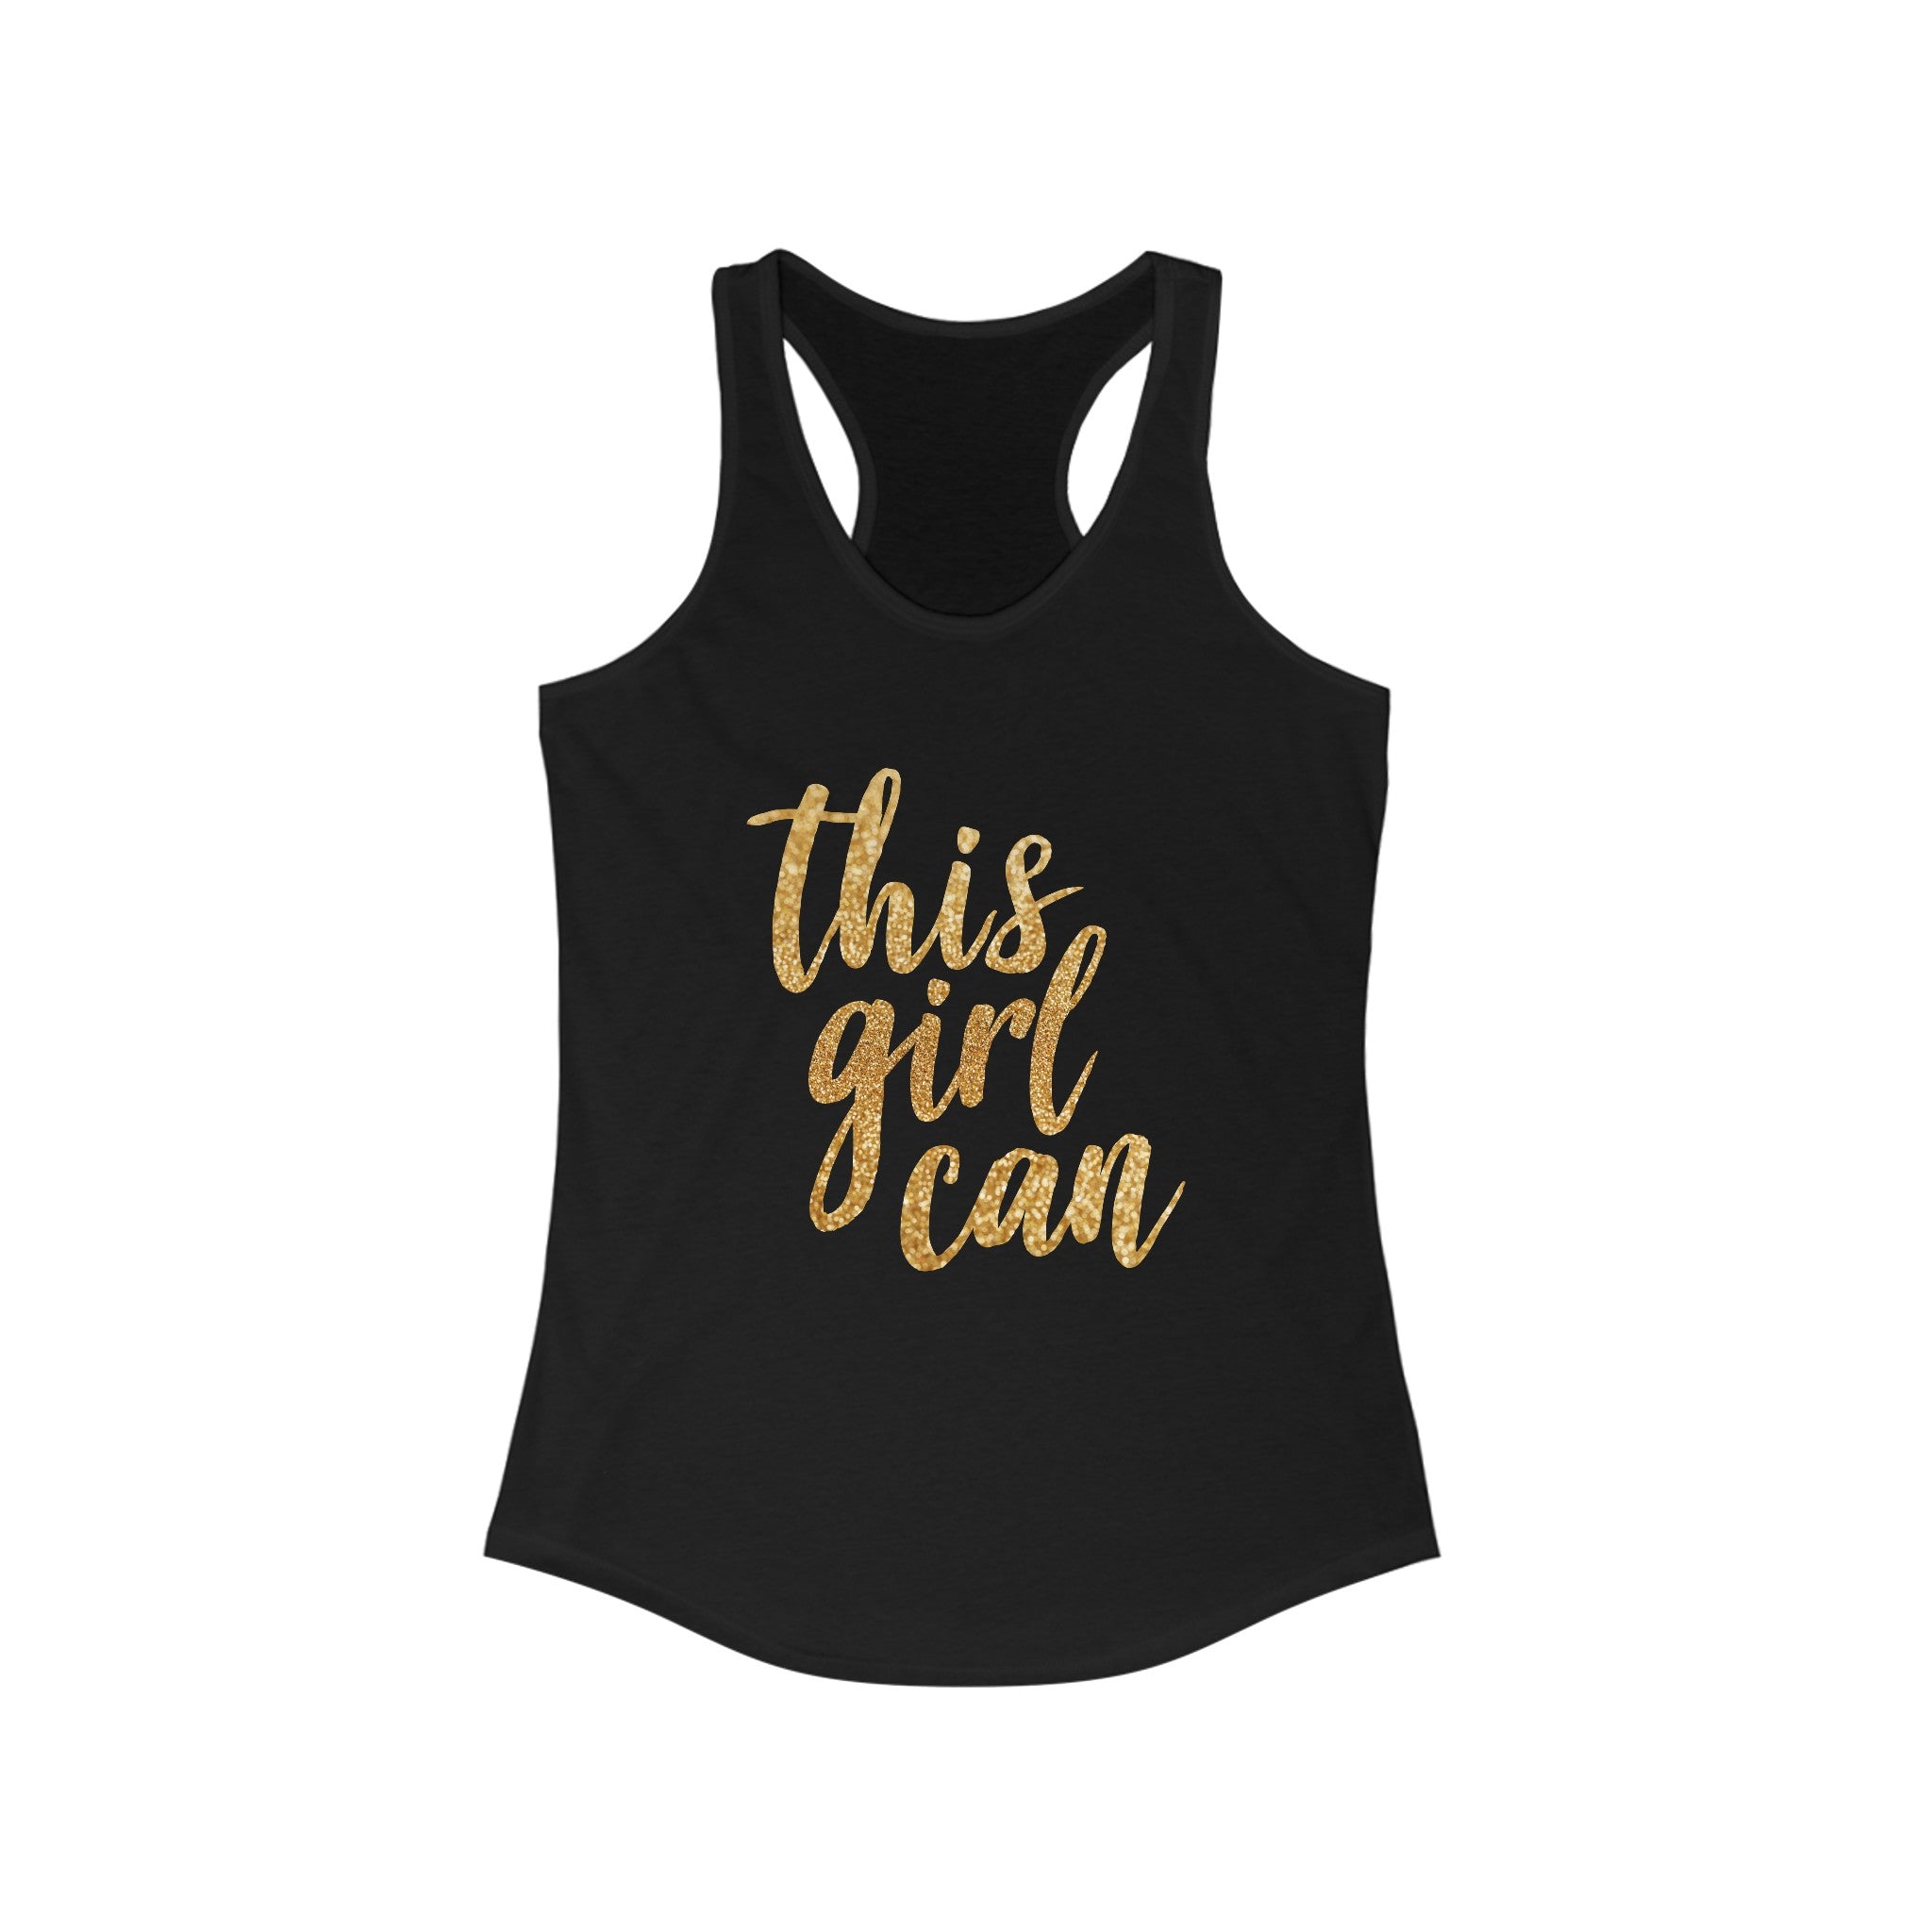 This Girl Can - Women's Racerback Tank